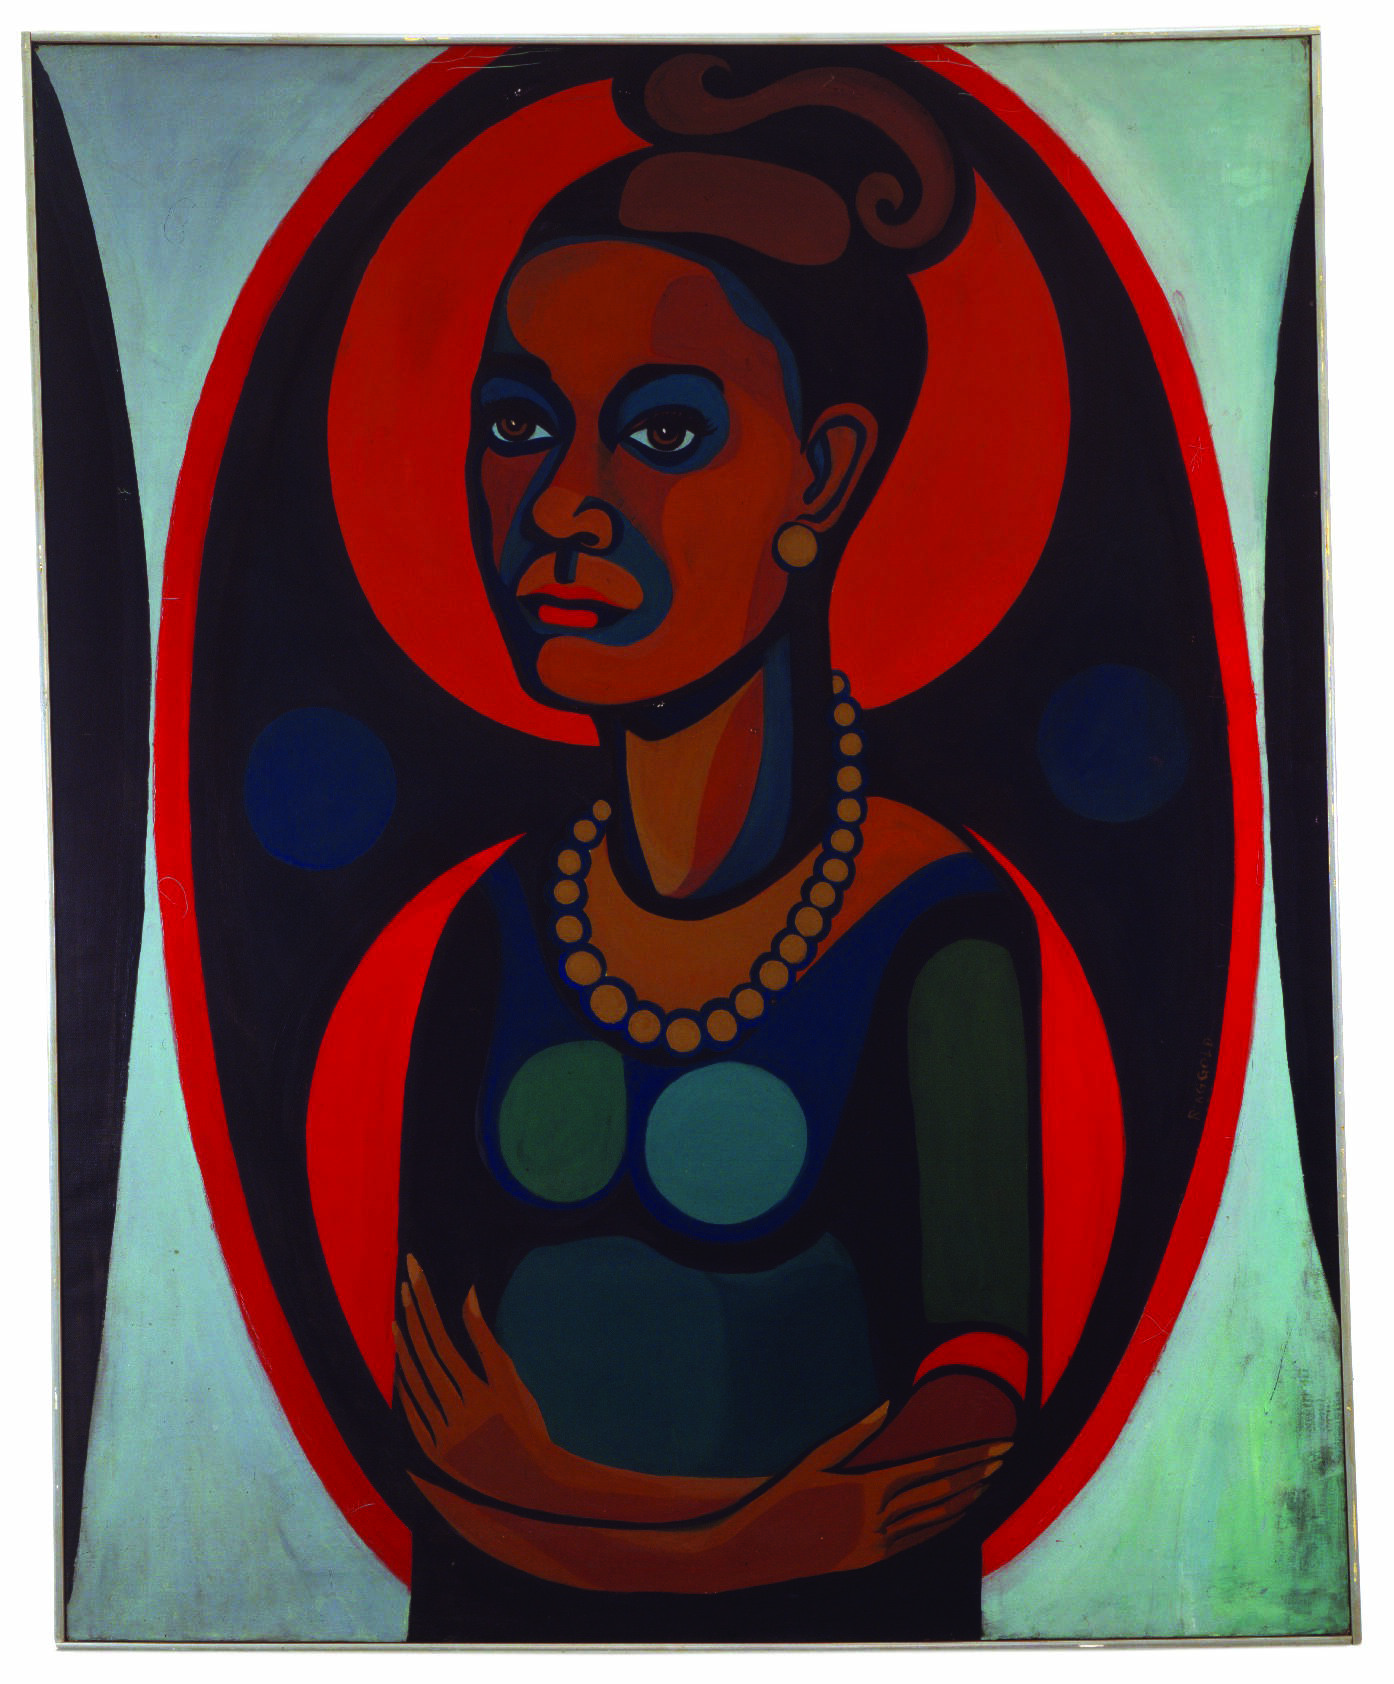 The life of Die, Faith Ringgold’s startling masterpiece